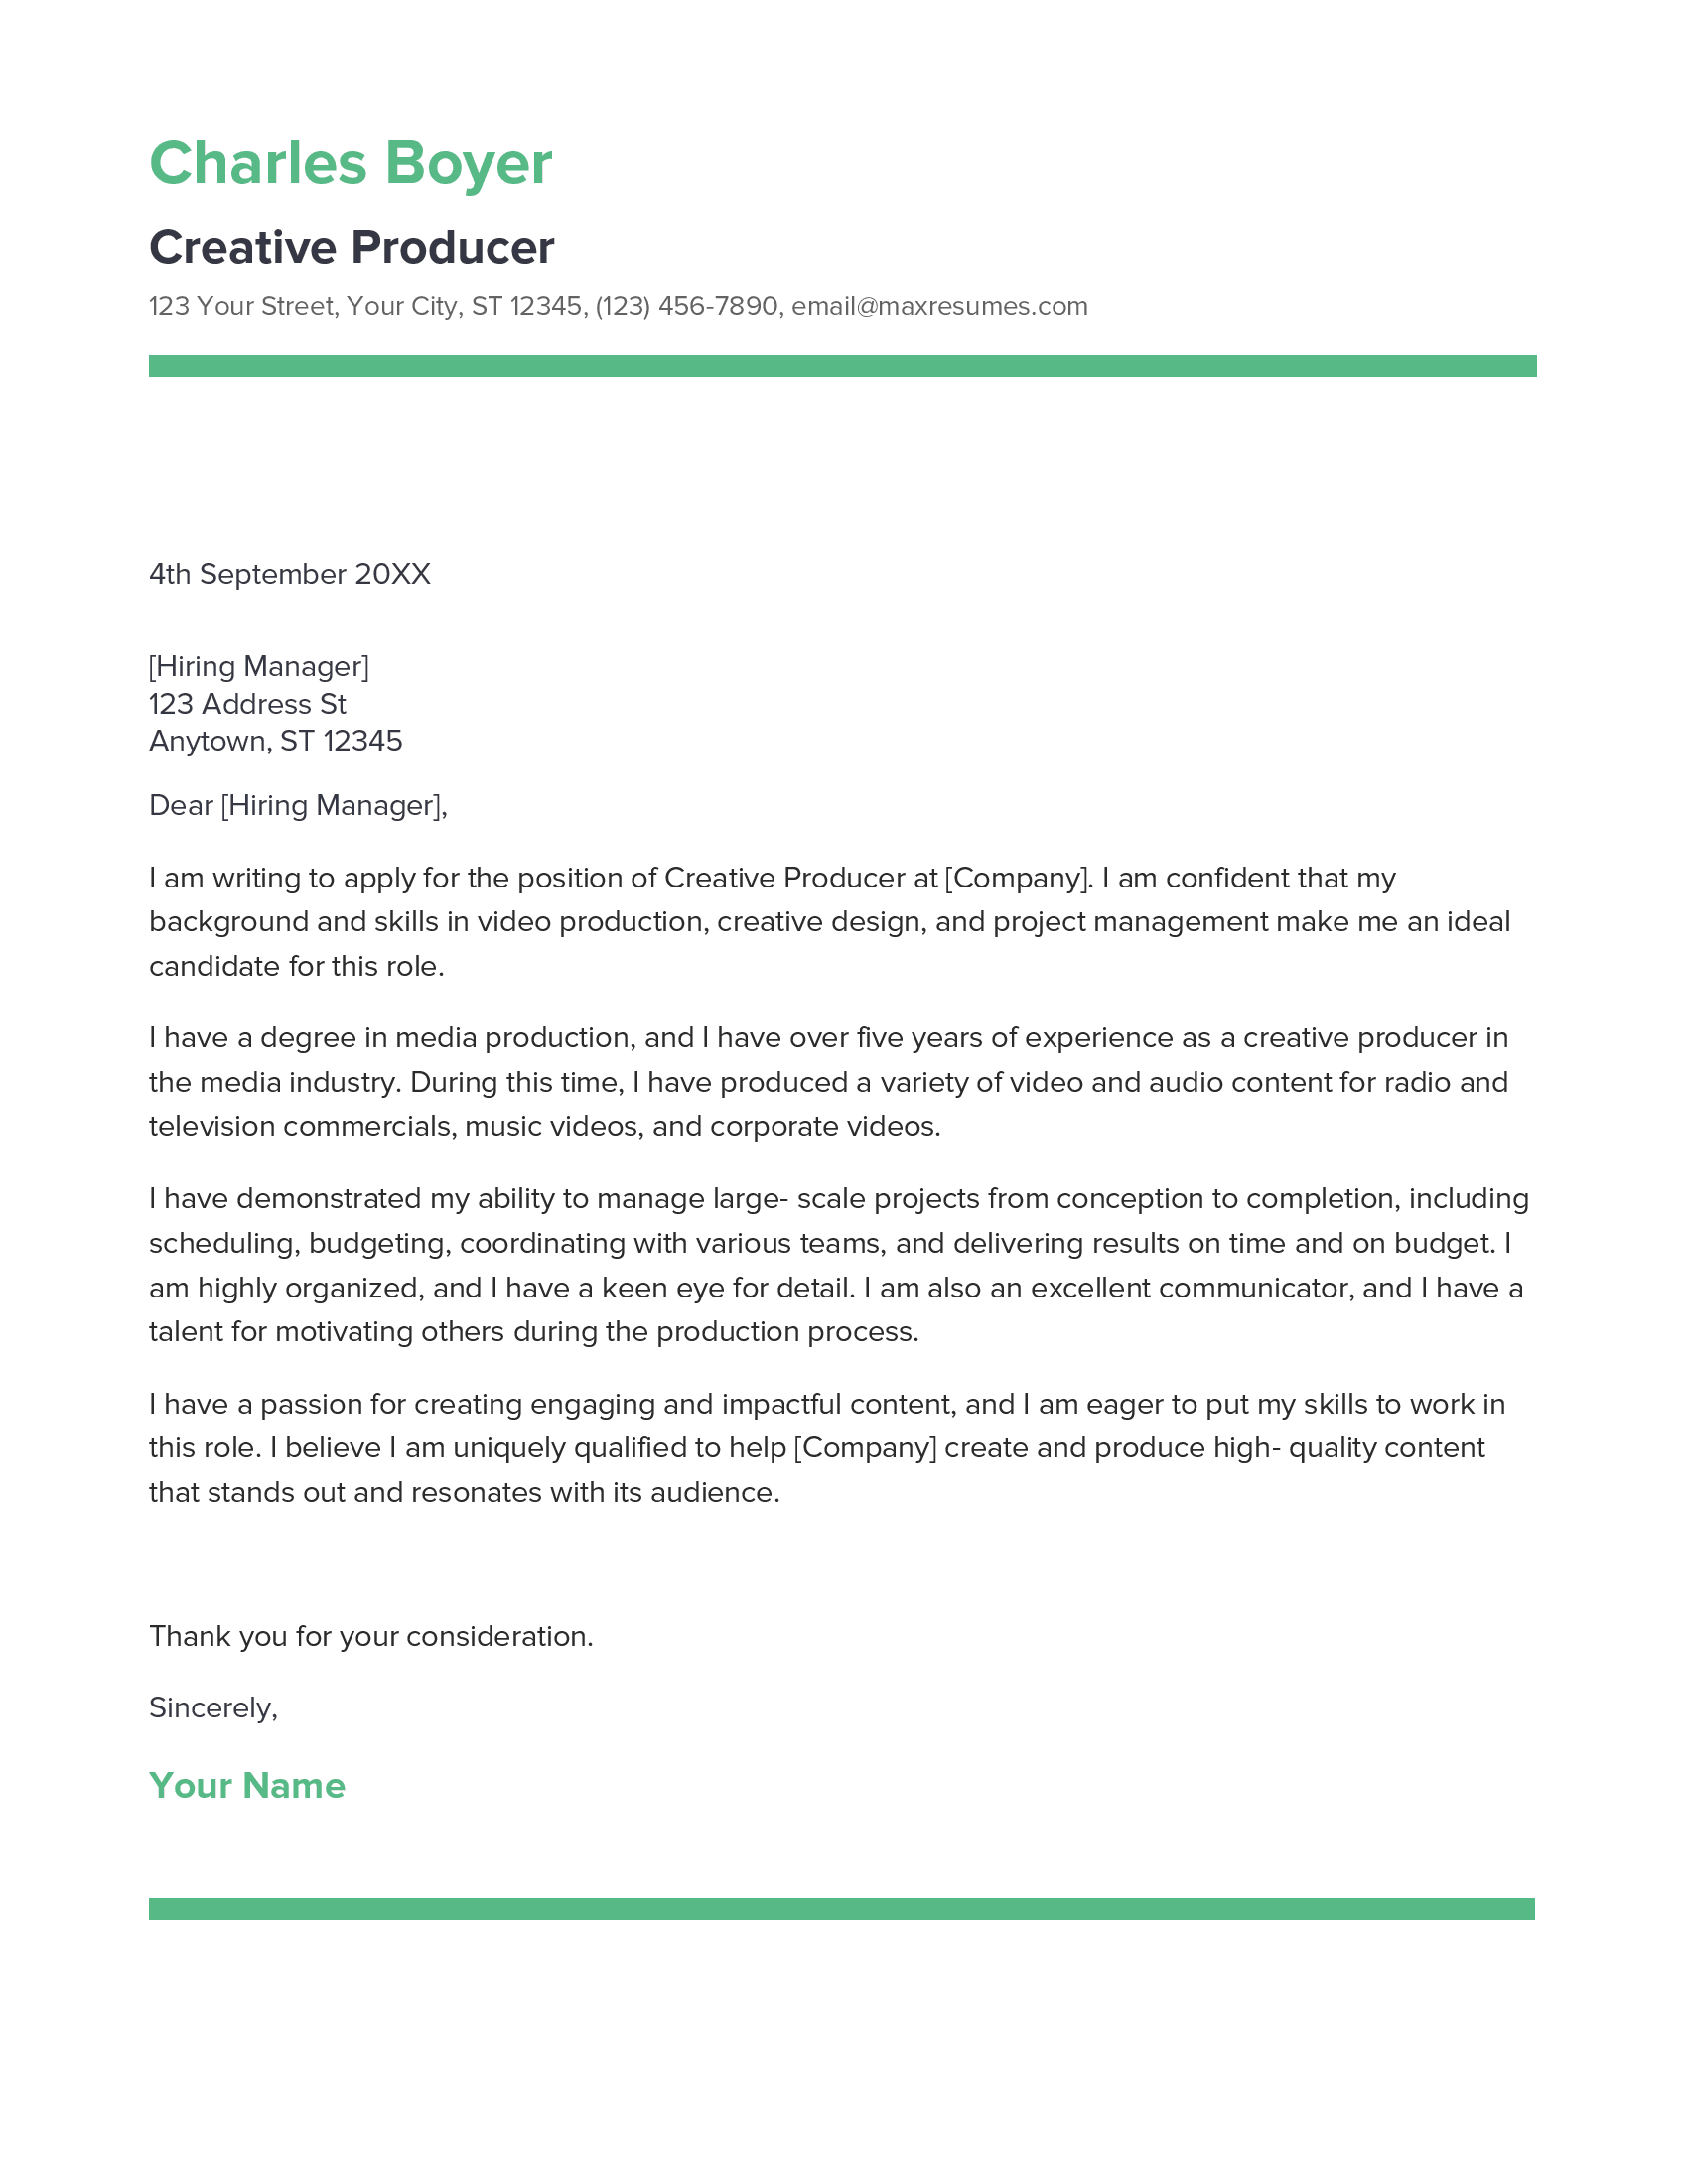 Creative Producer Cover Letter Example